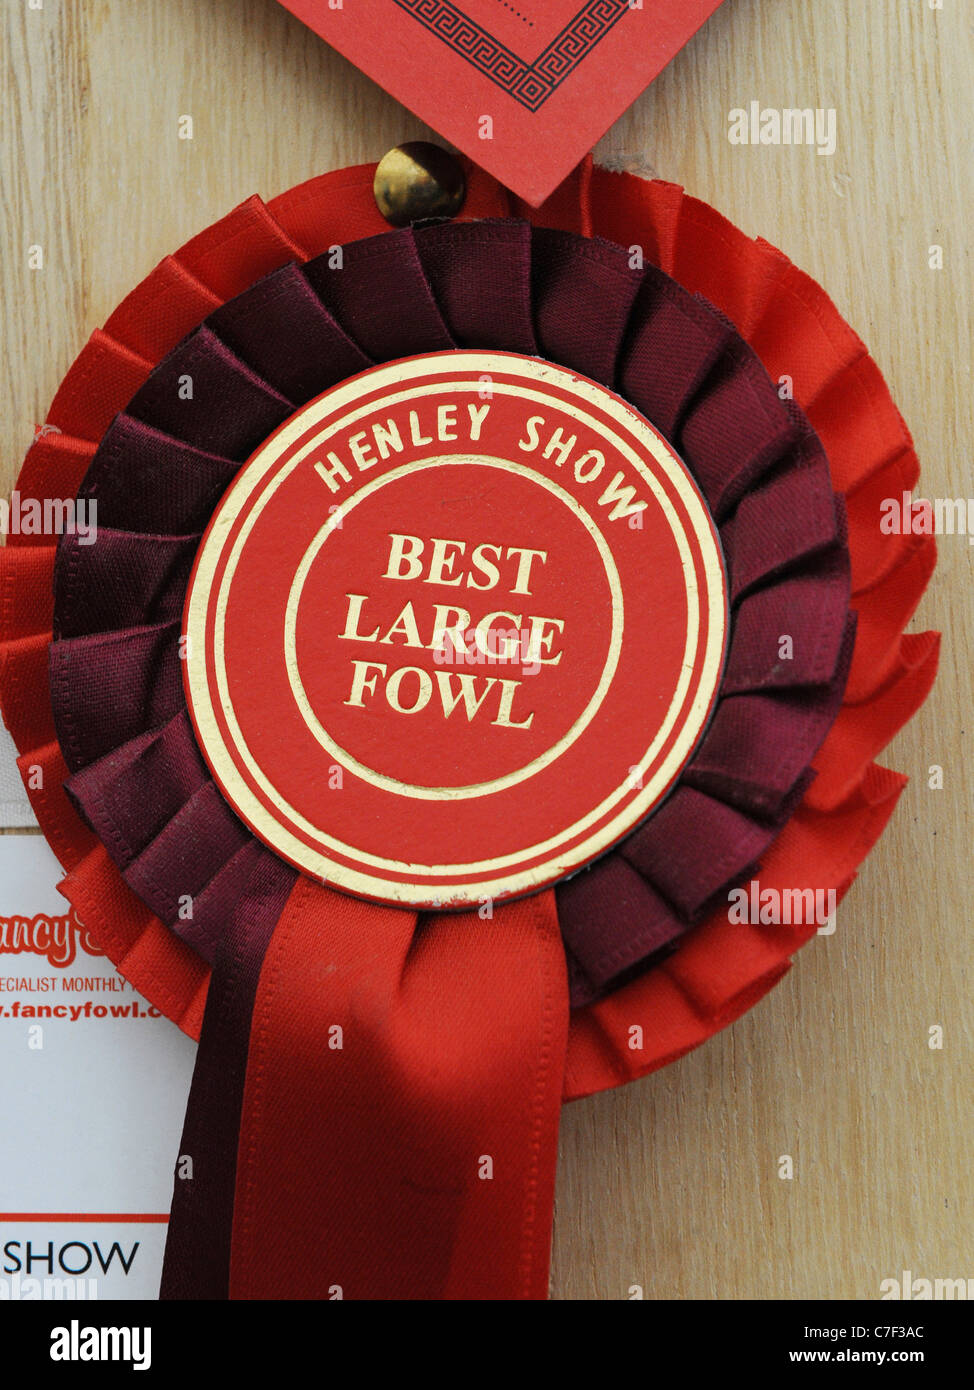 Best Puppy Dog Rosettes 10 sets 1st-3rd 1 Tier Best In Show Res Best In Show 